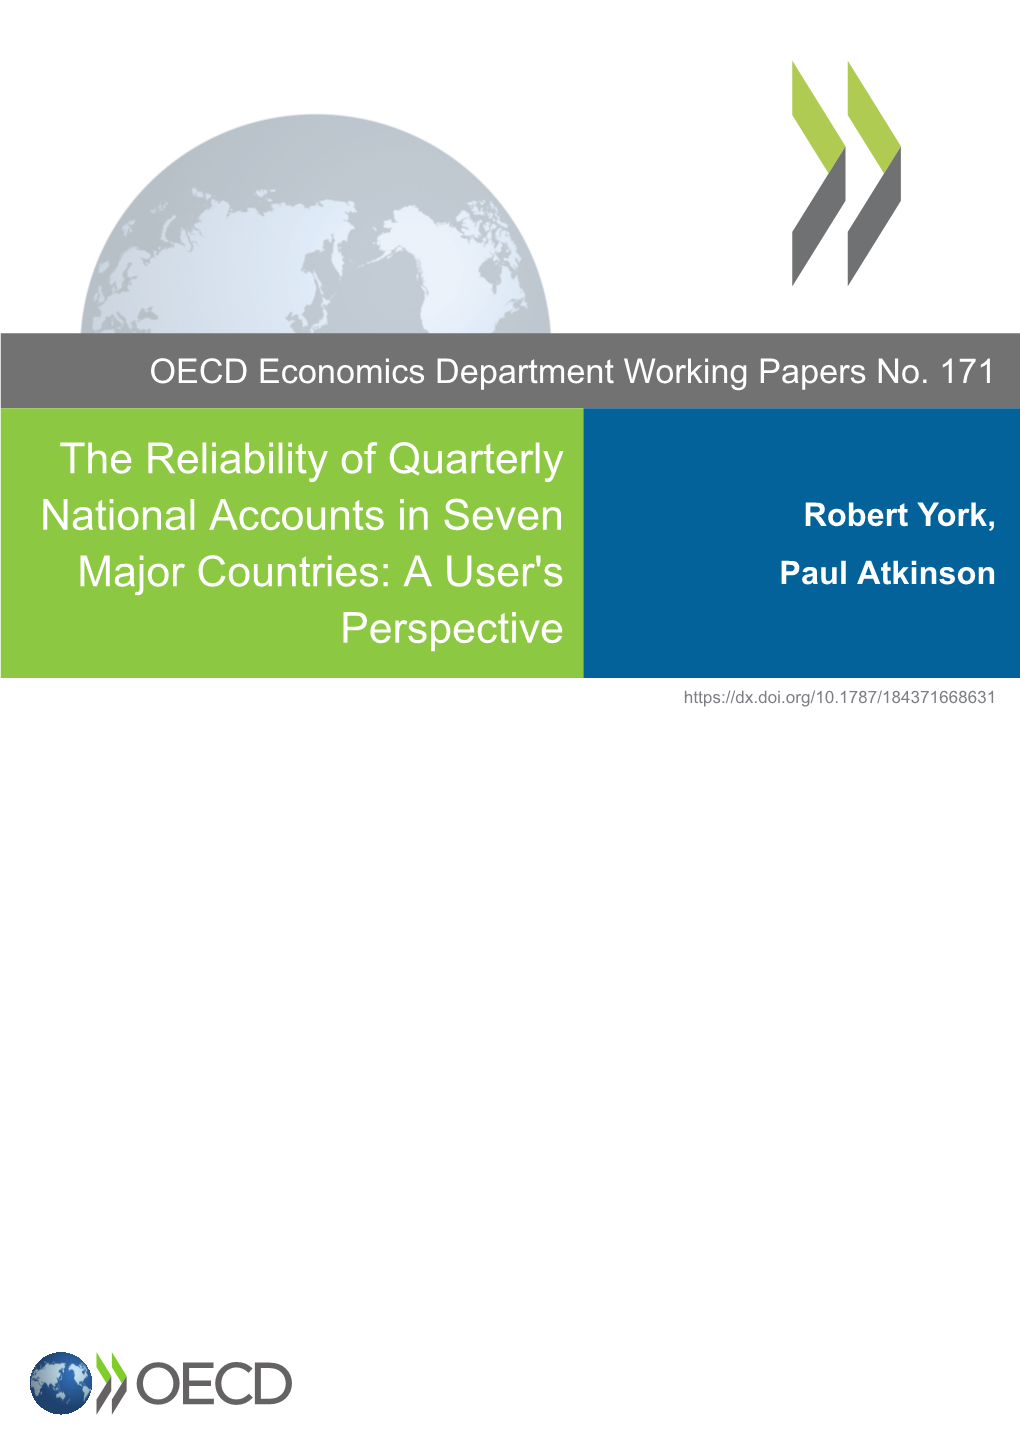 The Reliability of Quarterly National Accounts in Seven Major Countries: a User's Perspective